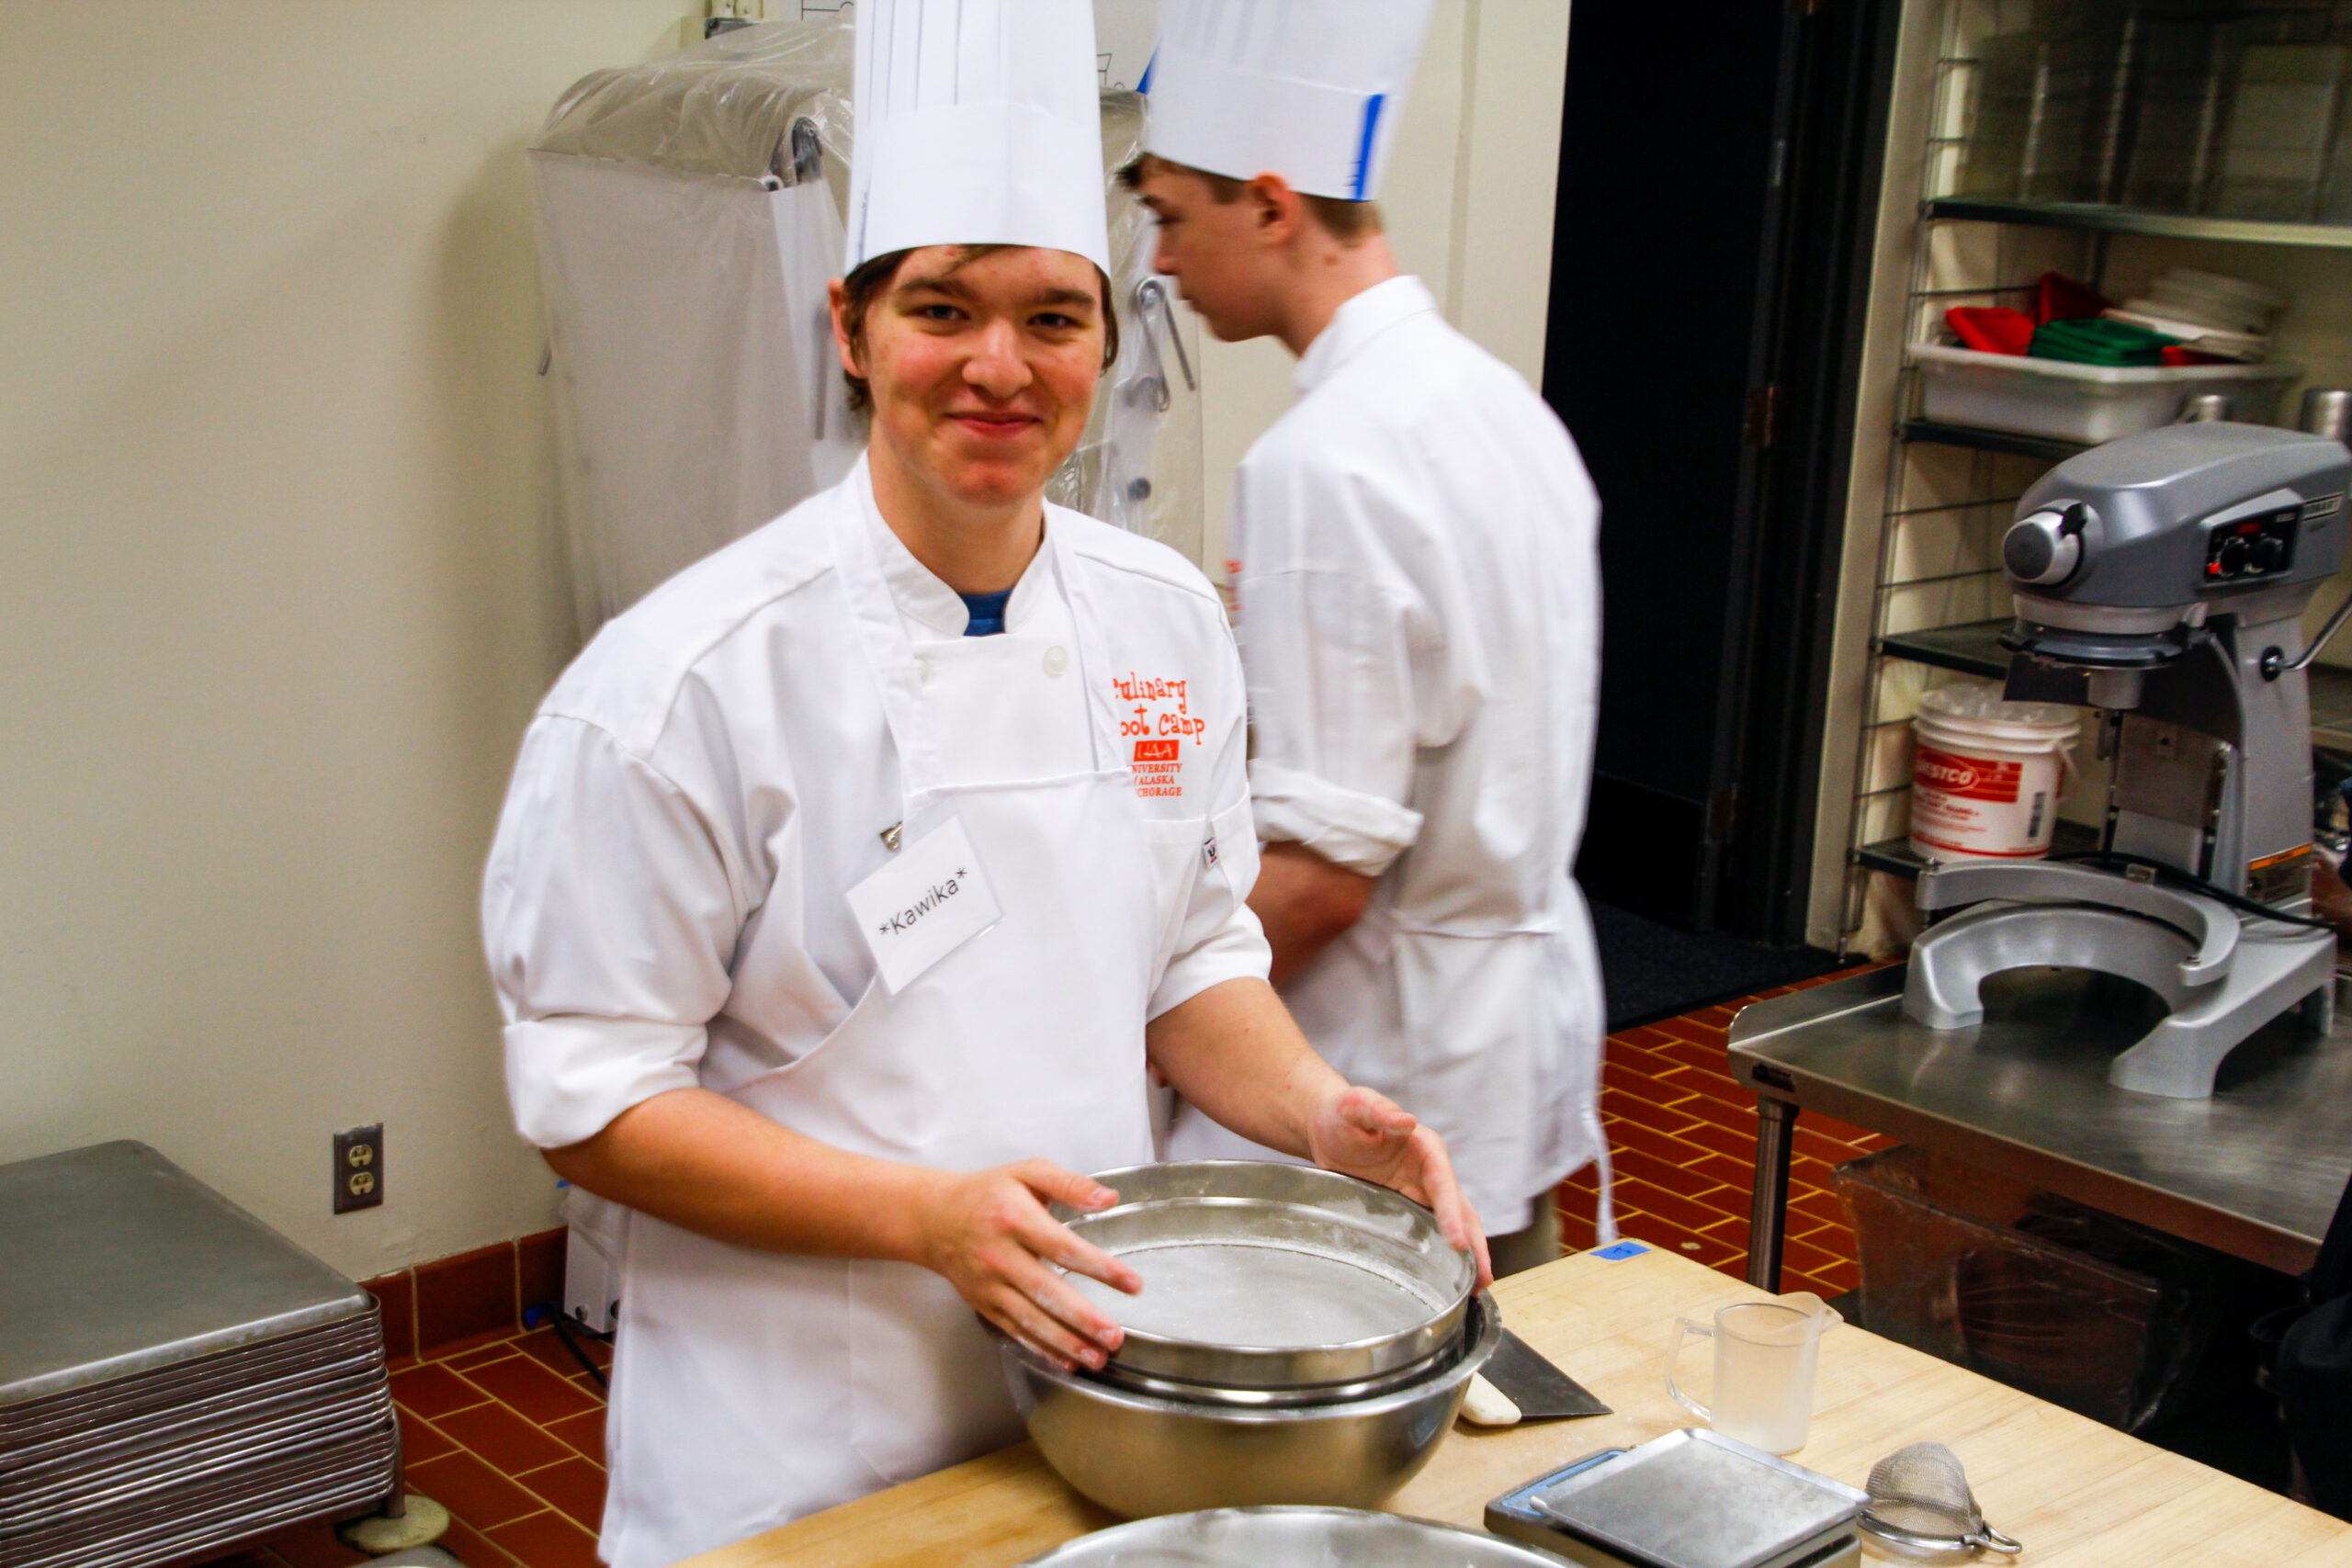 A teenager in a white chef's coat and hat stands at a kitchen counter, with a mixing bowl and sifter.